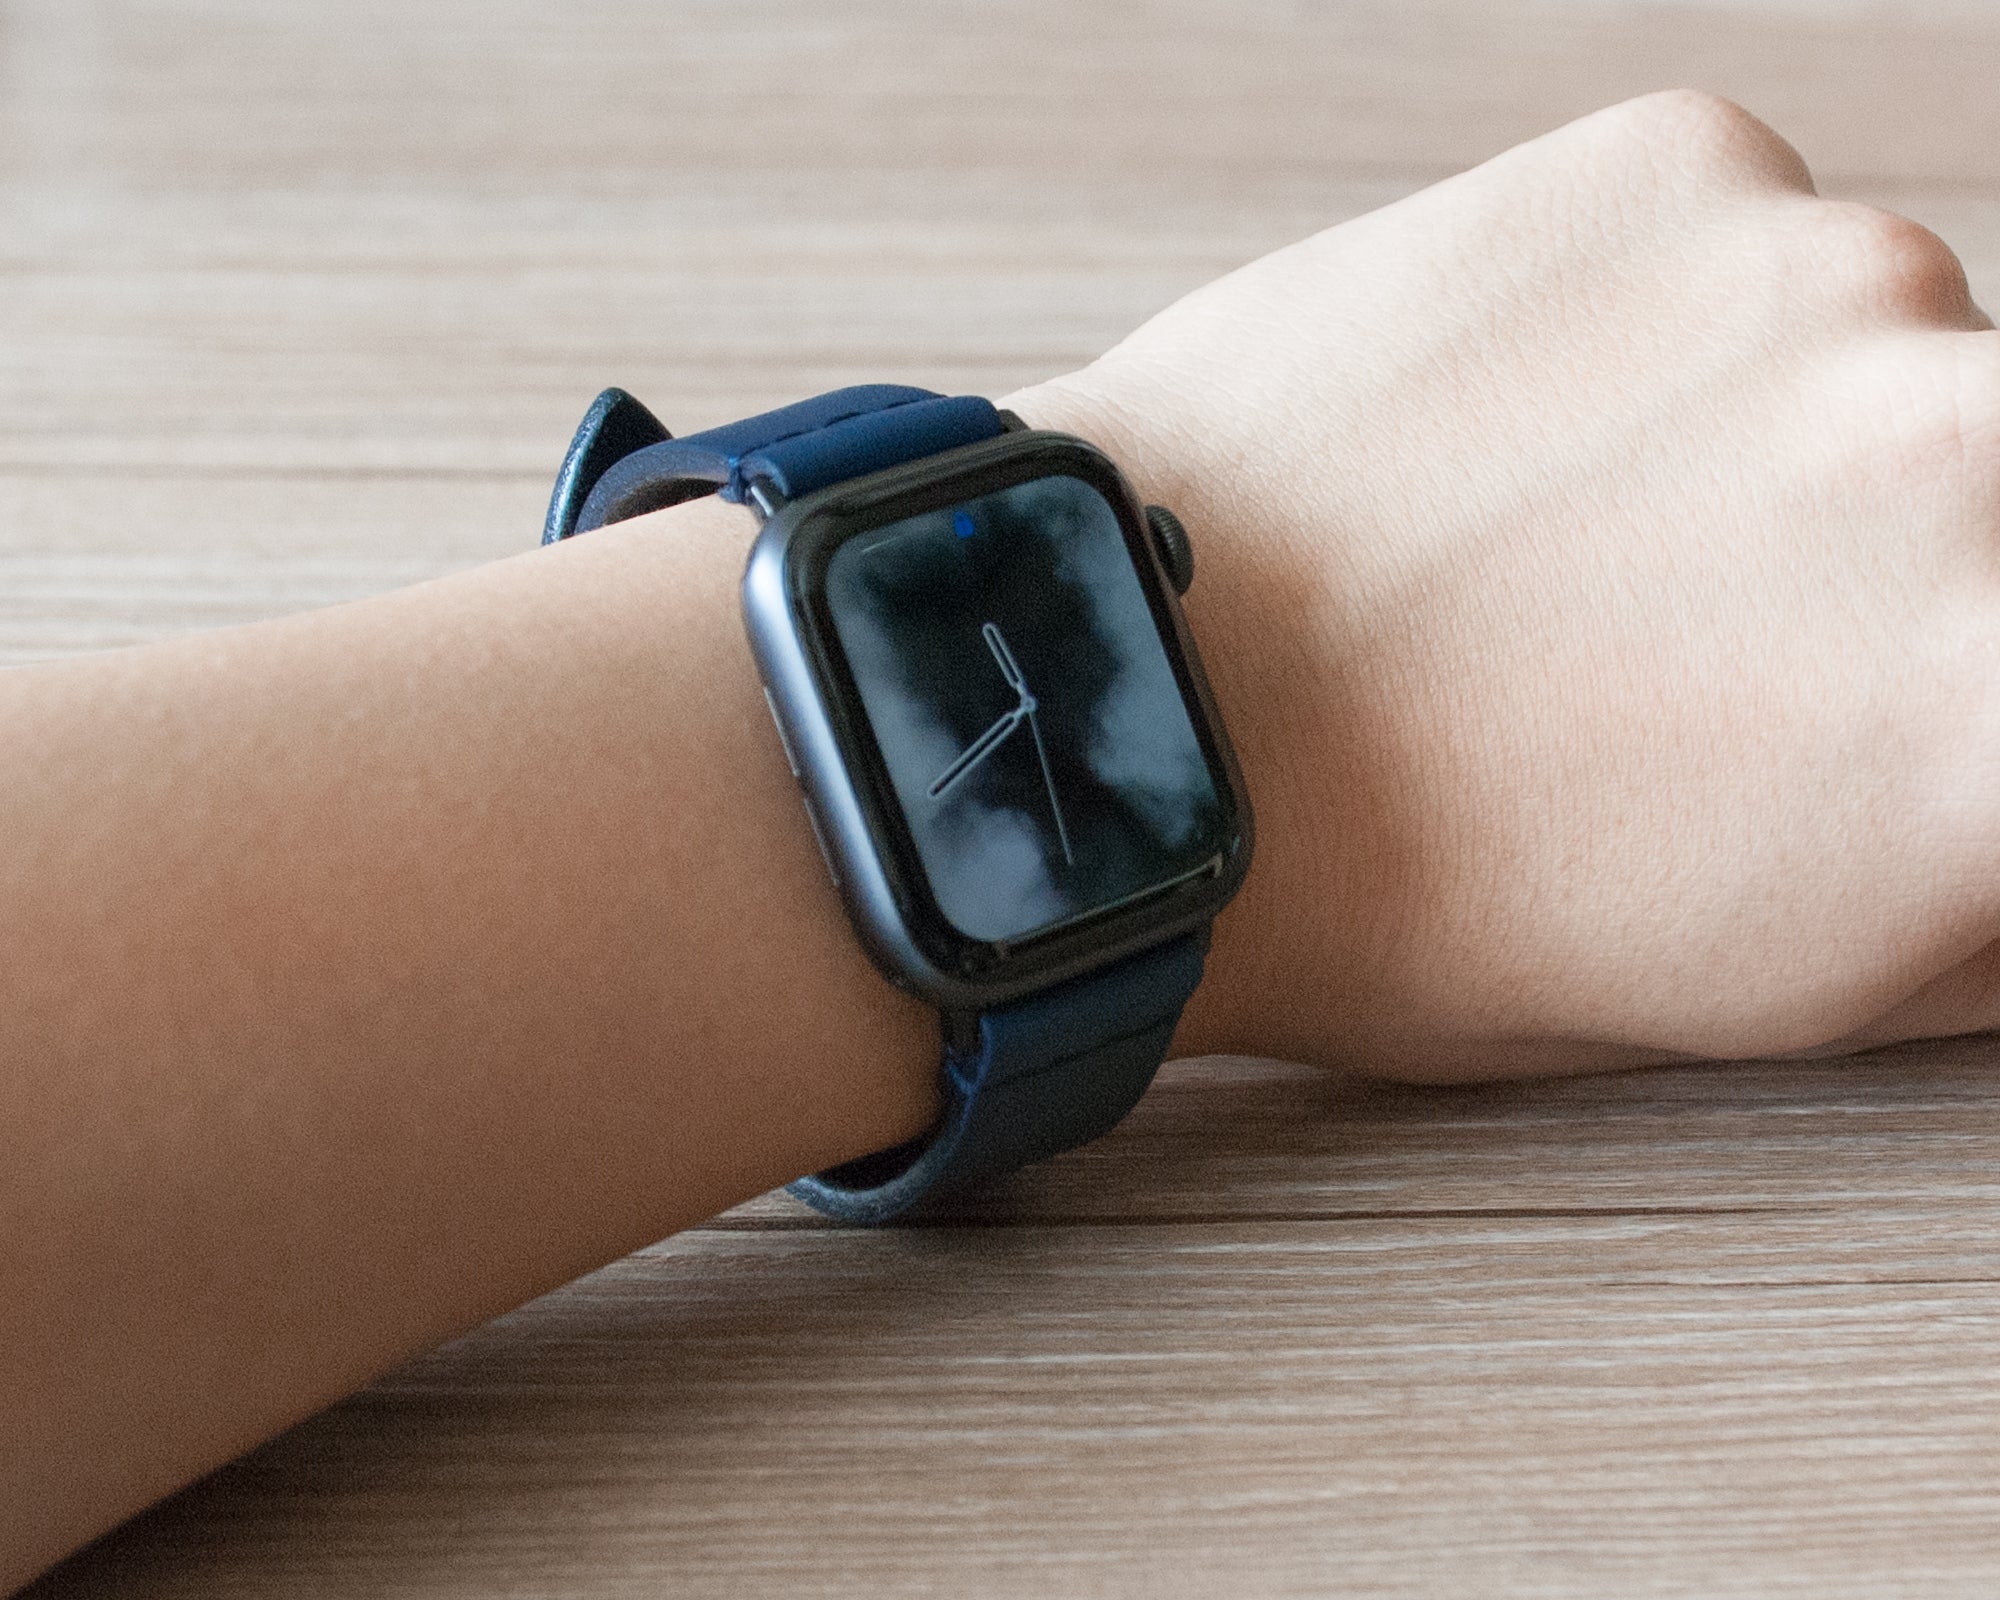 Sedona In Navy - Leather Luxury Apple Watch Band - Space Gray